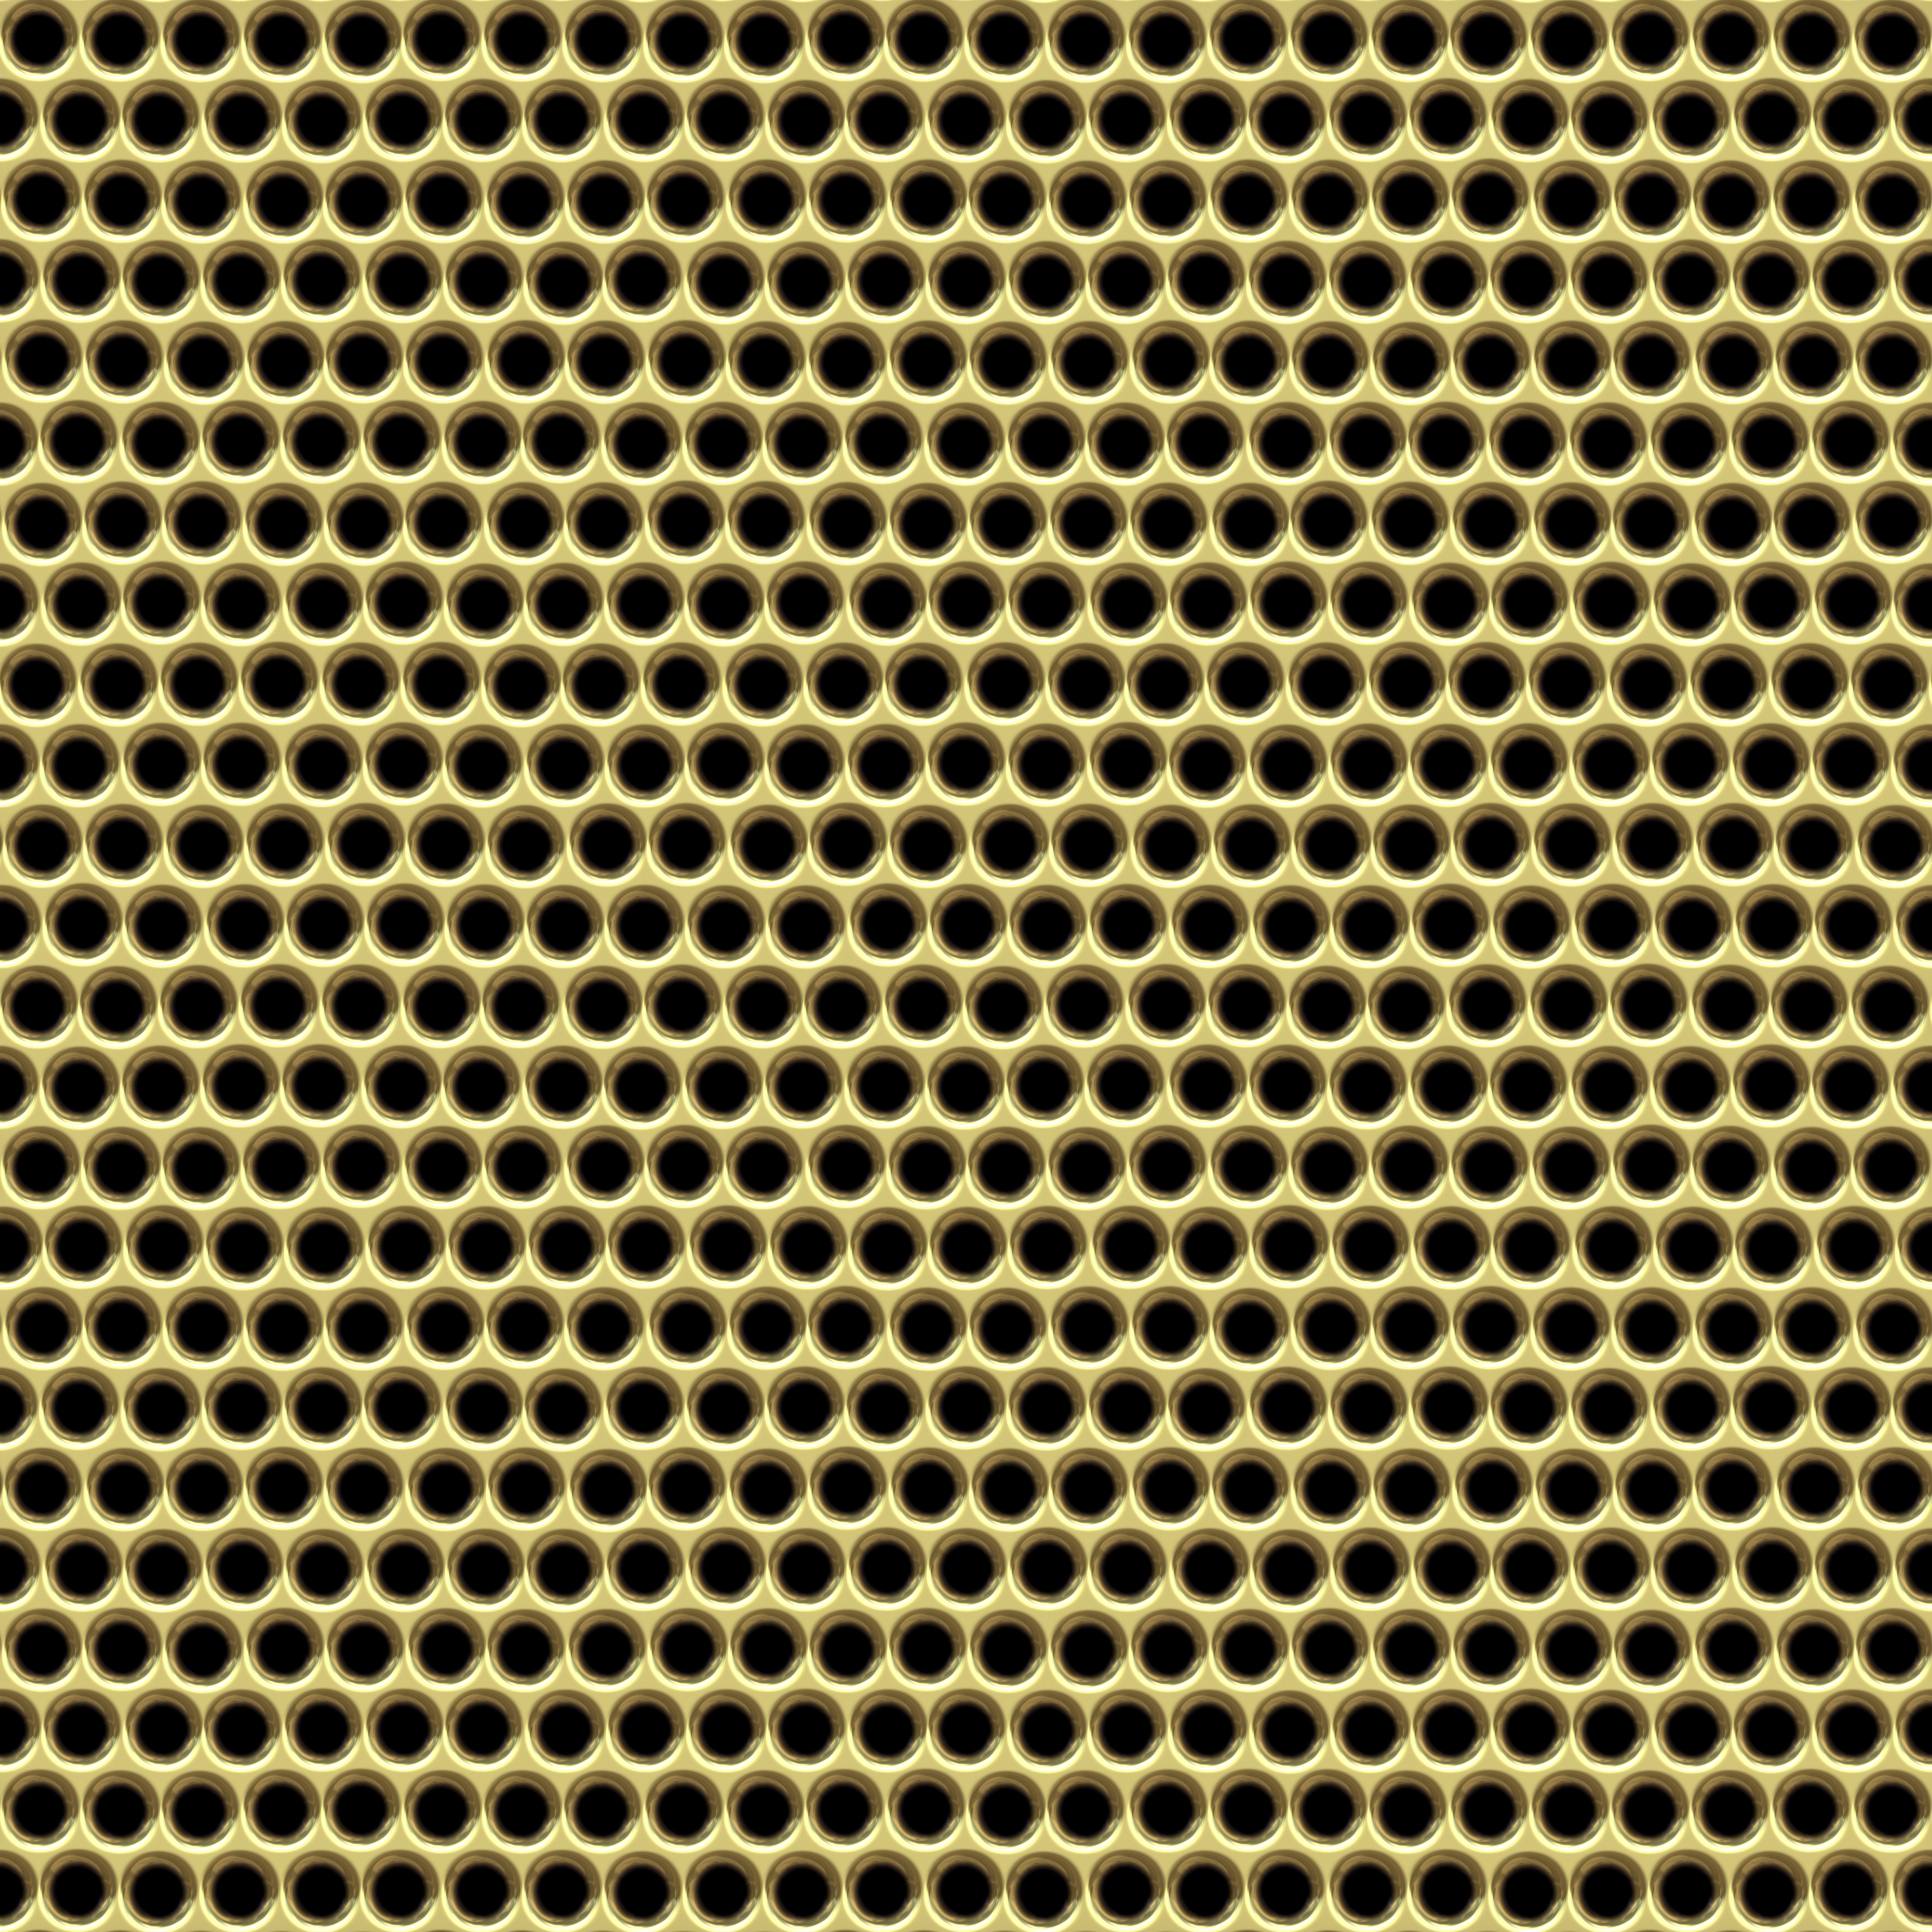 Background Gold Metal Grid Or Grill Texture